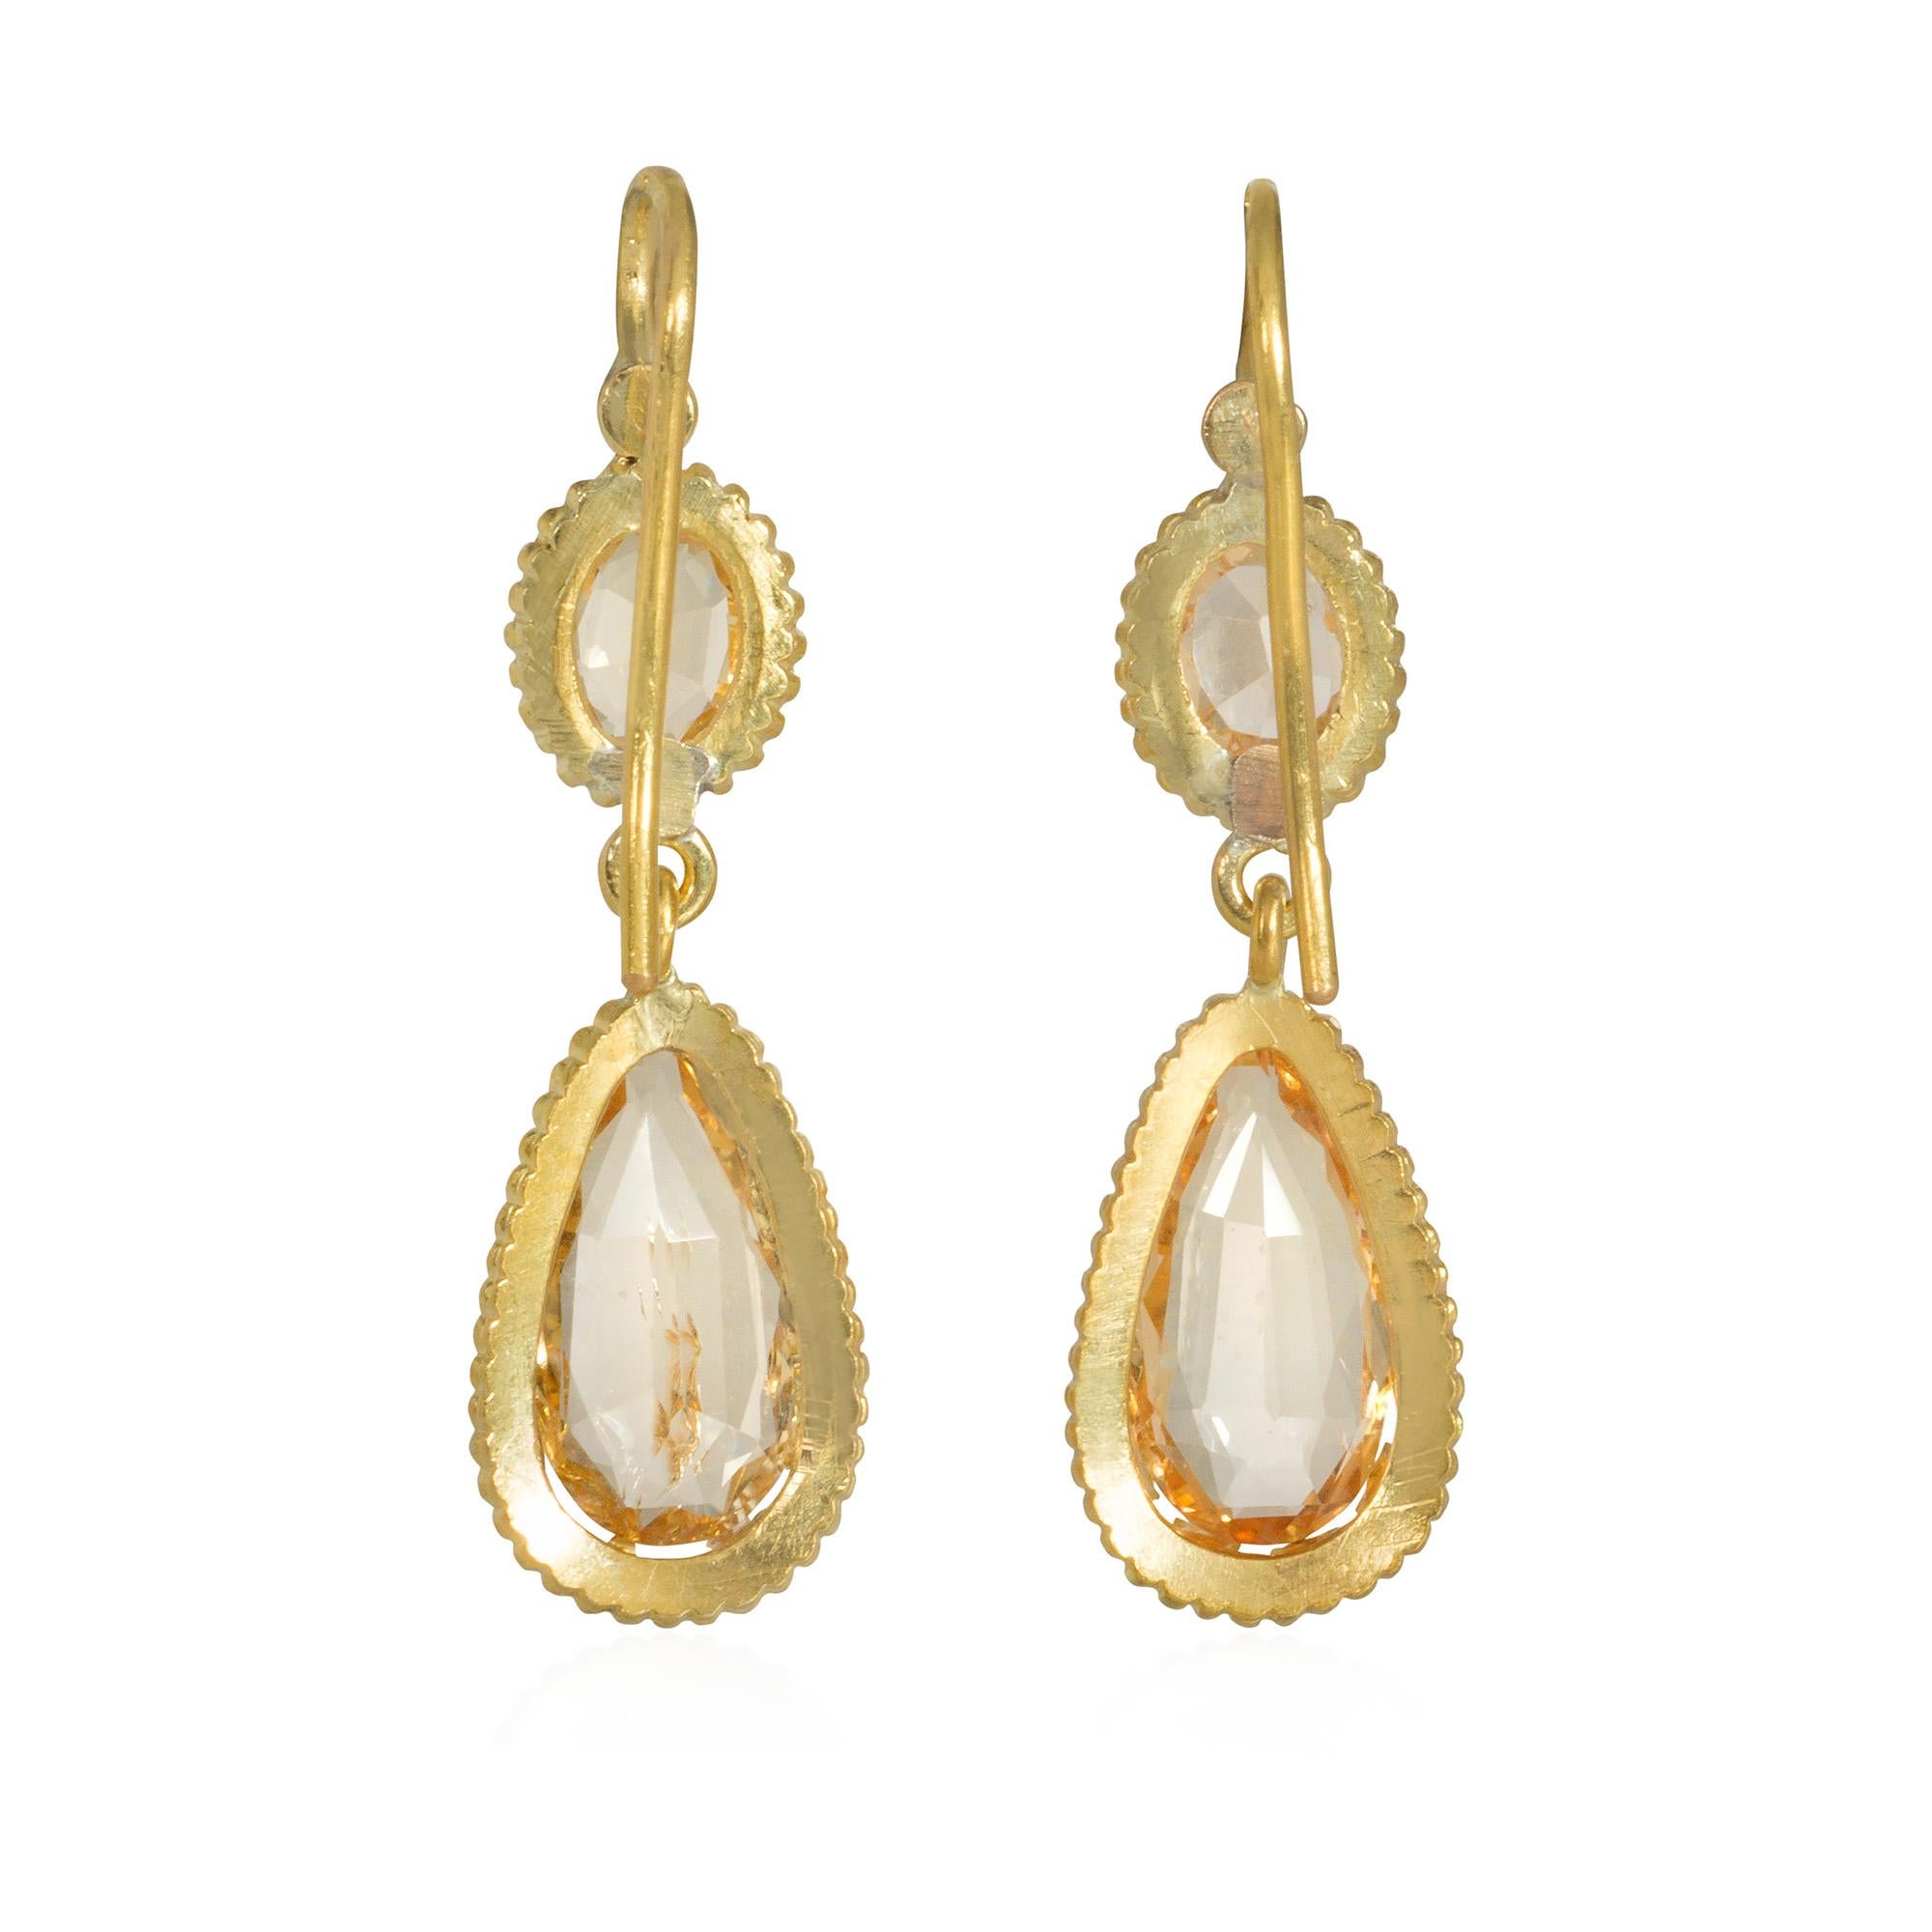 Pear Cut Victorian Gold and Topaz Two-Stone Earrings with Pear-Shaped Drops